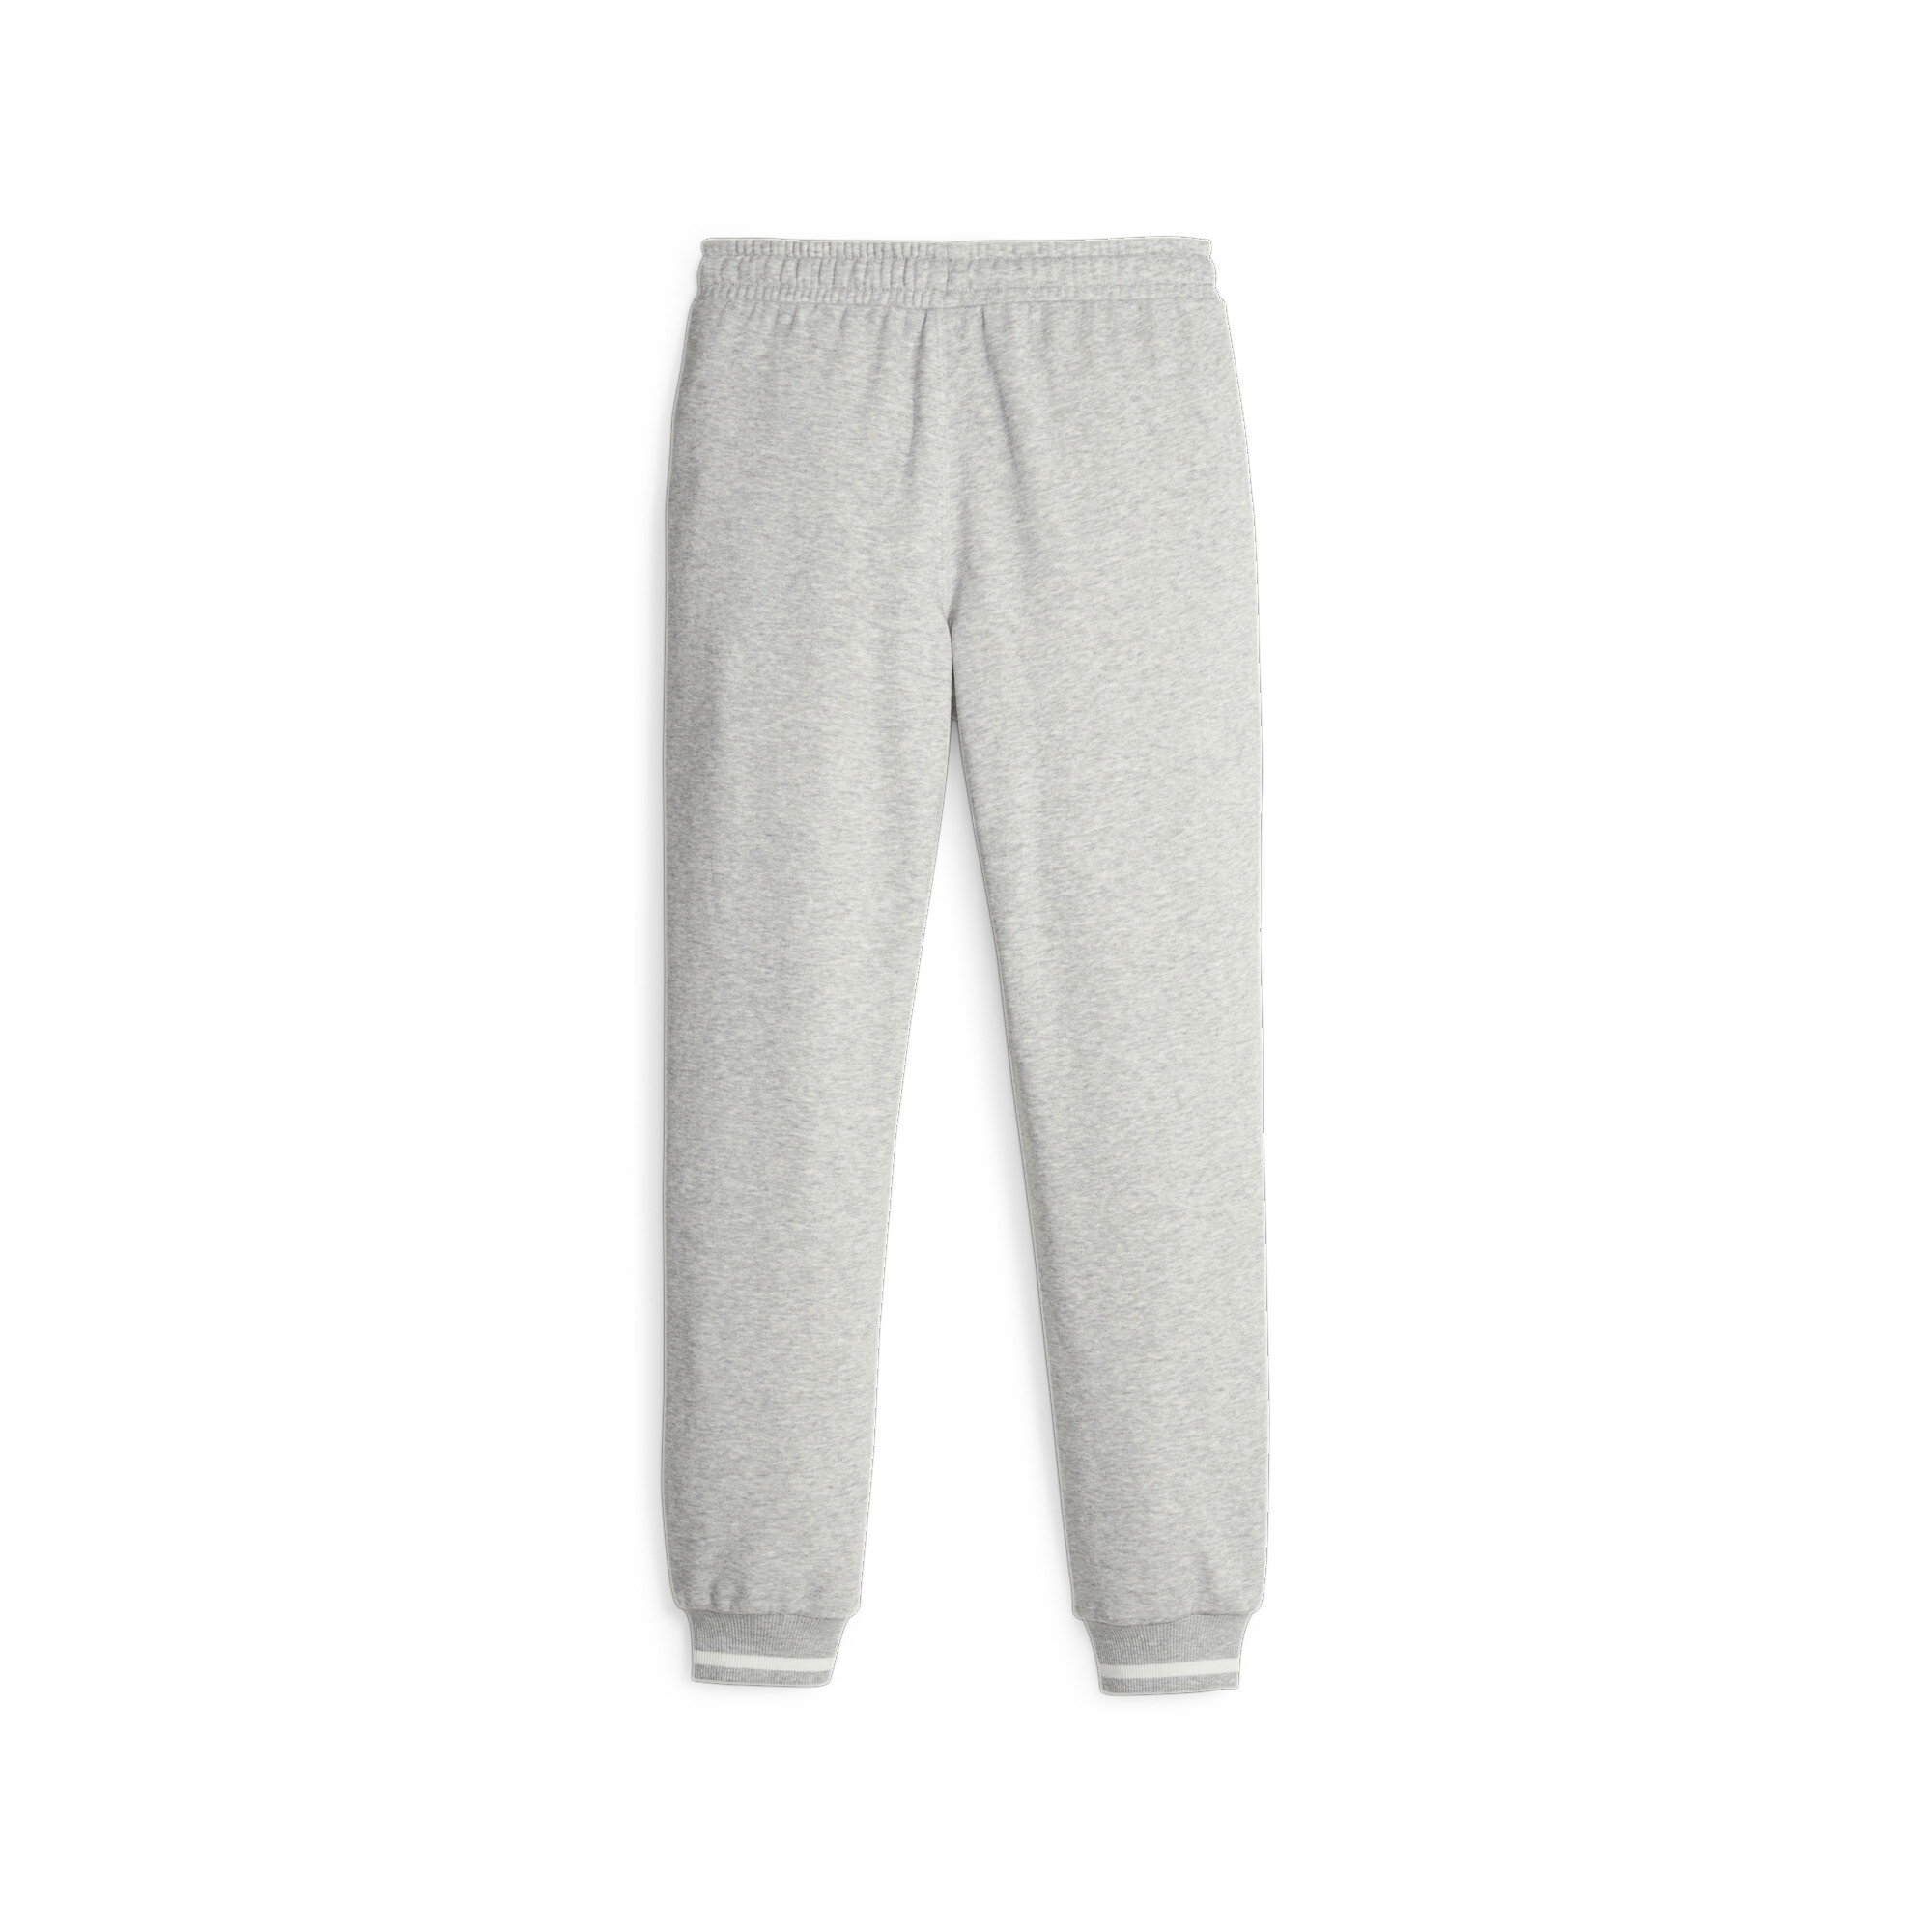 PUMA SQUAD Sweatpants In Heather, Size 13-14 Youth